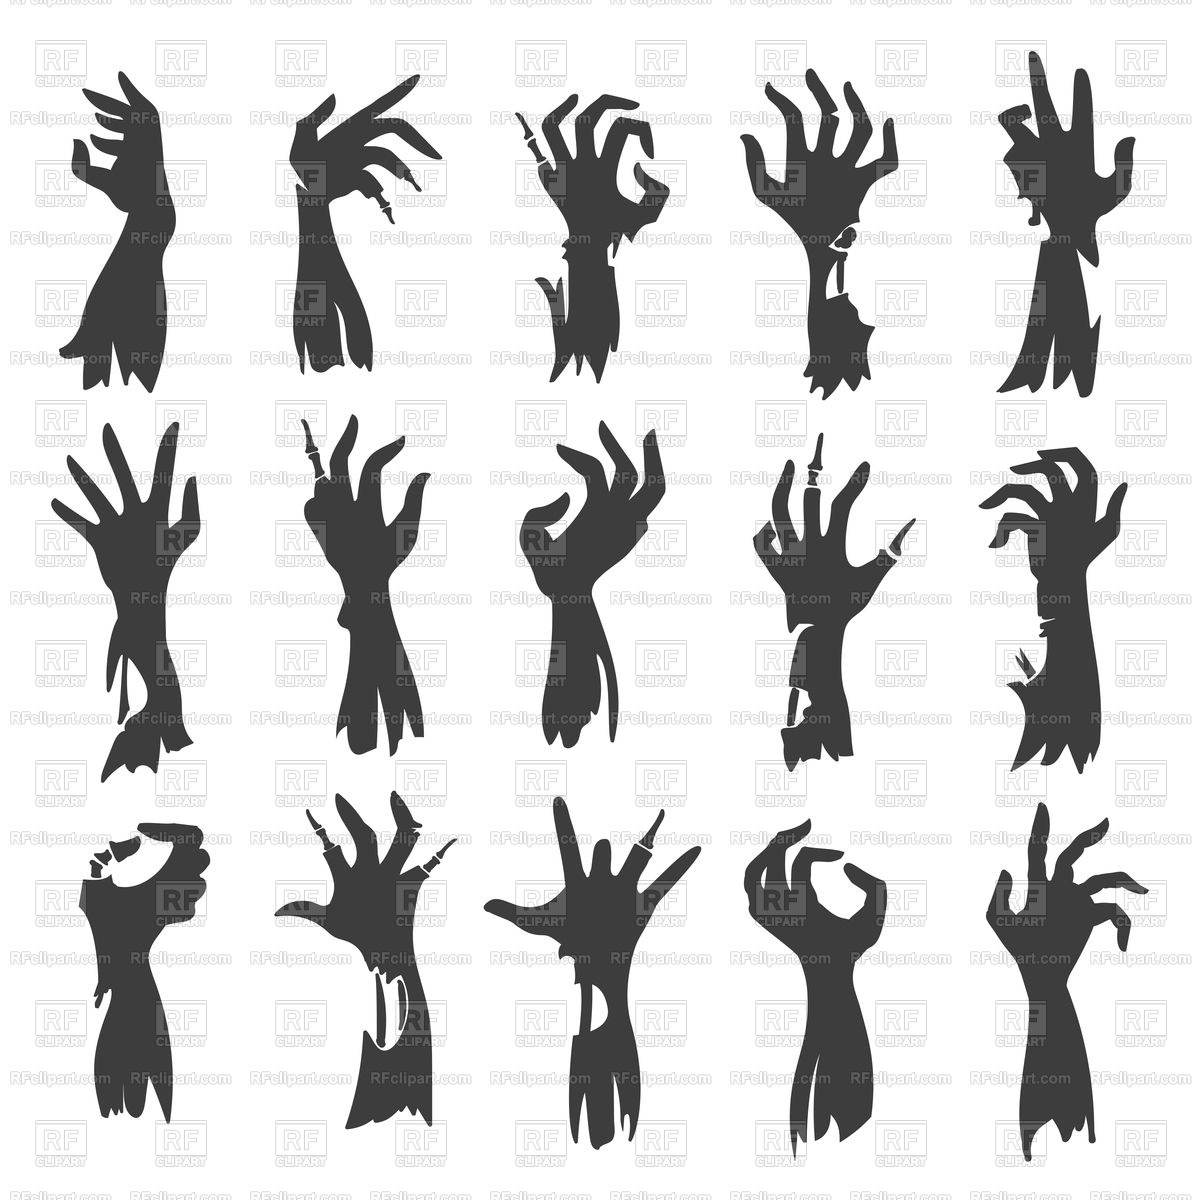 Download Zombie Hand Vector at Vectorified.com | Collection of ...